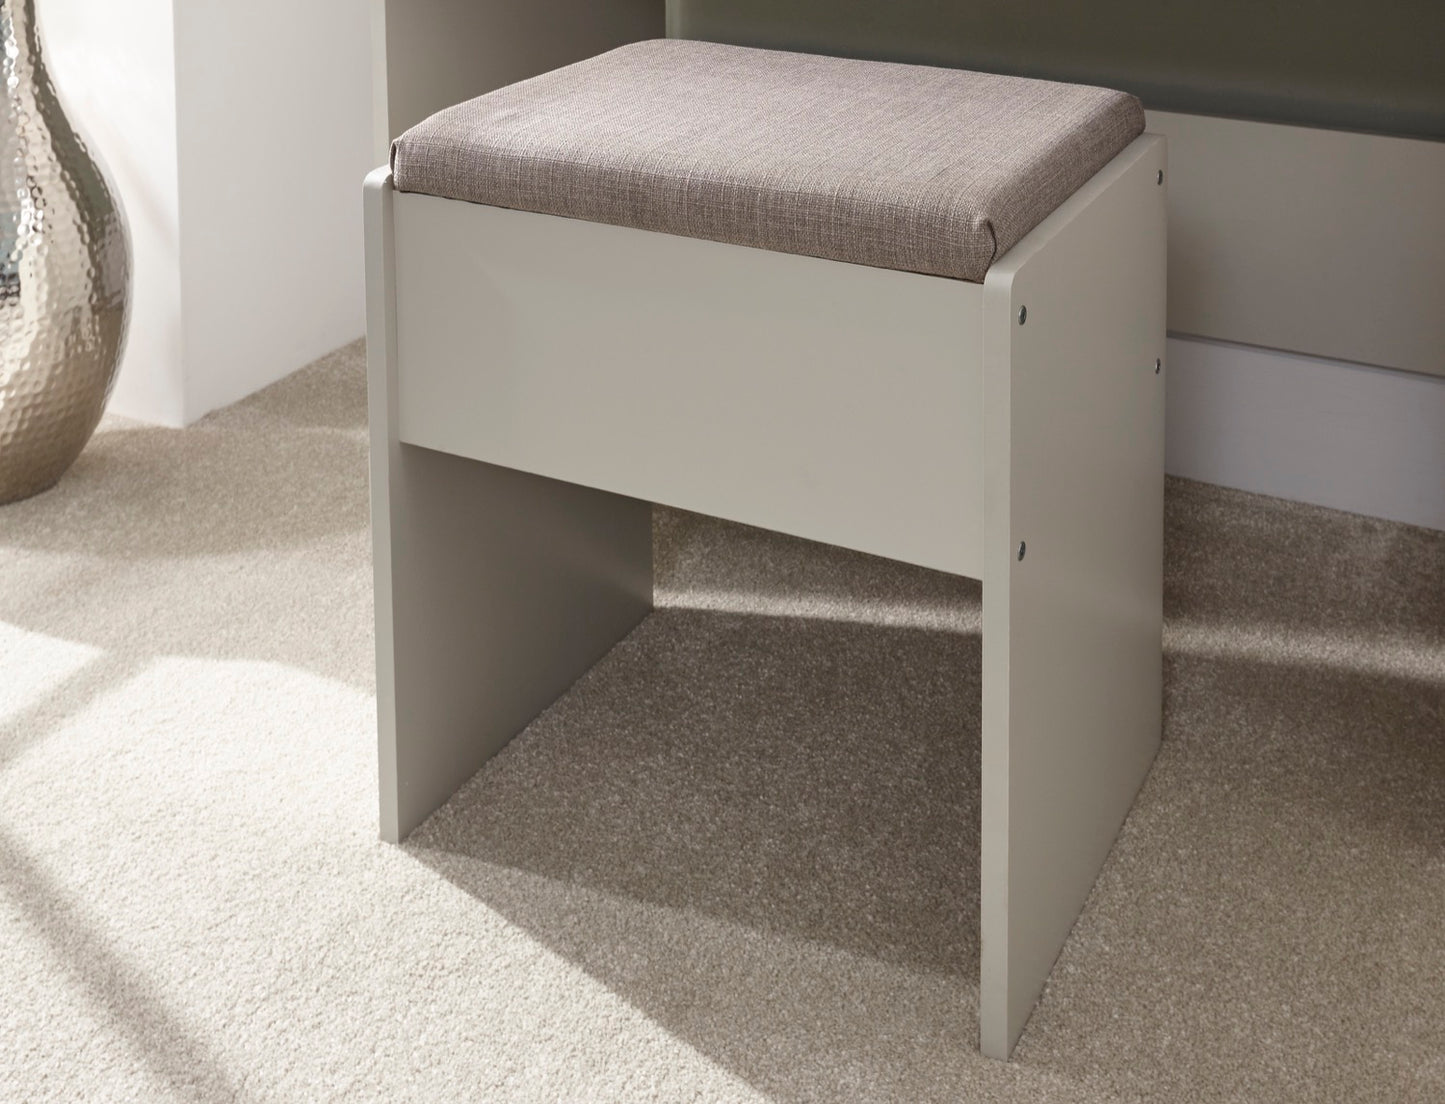 Kinsley Dressing Table With Stool-Grey